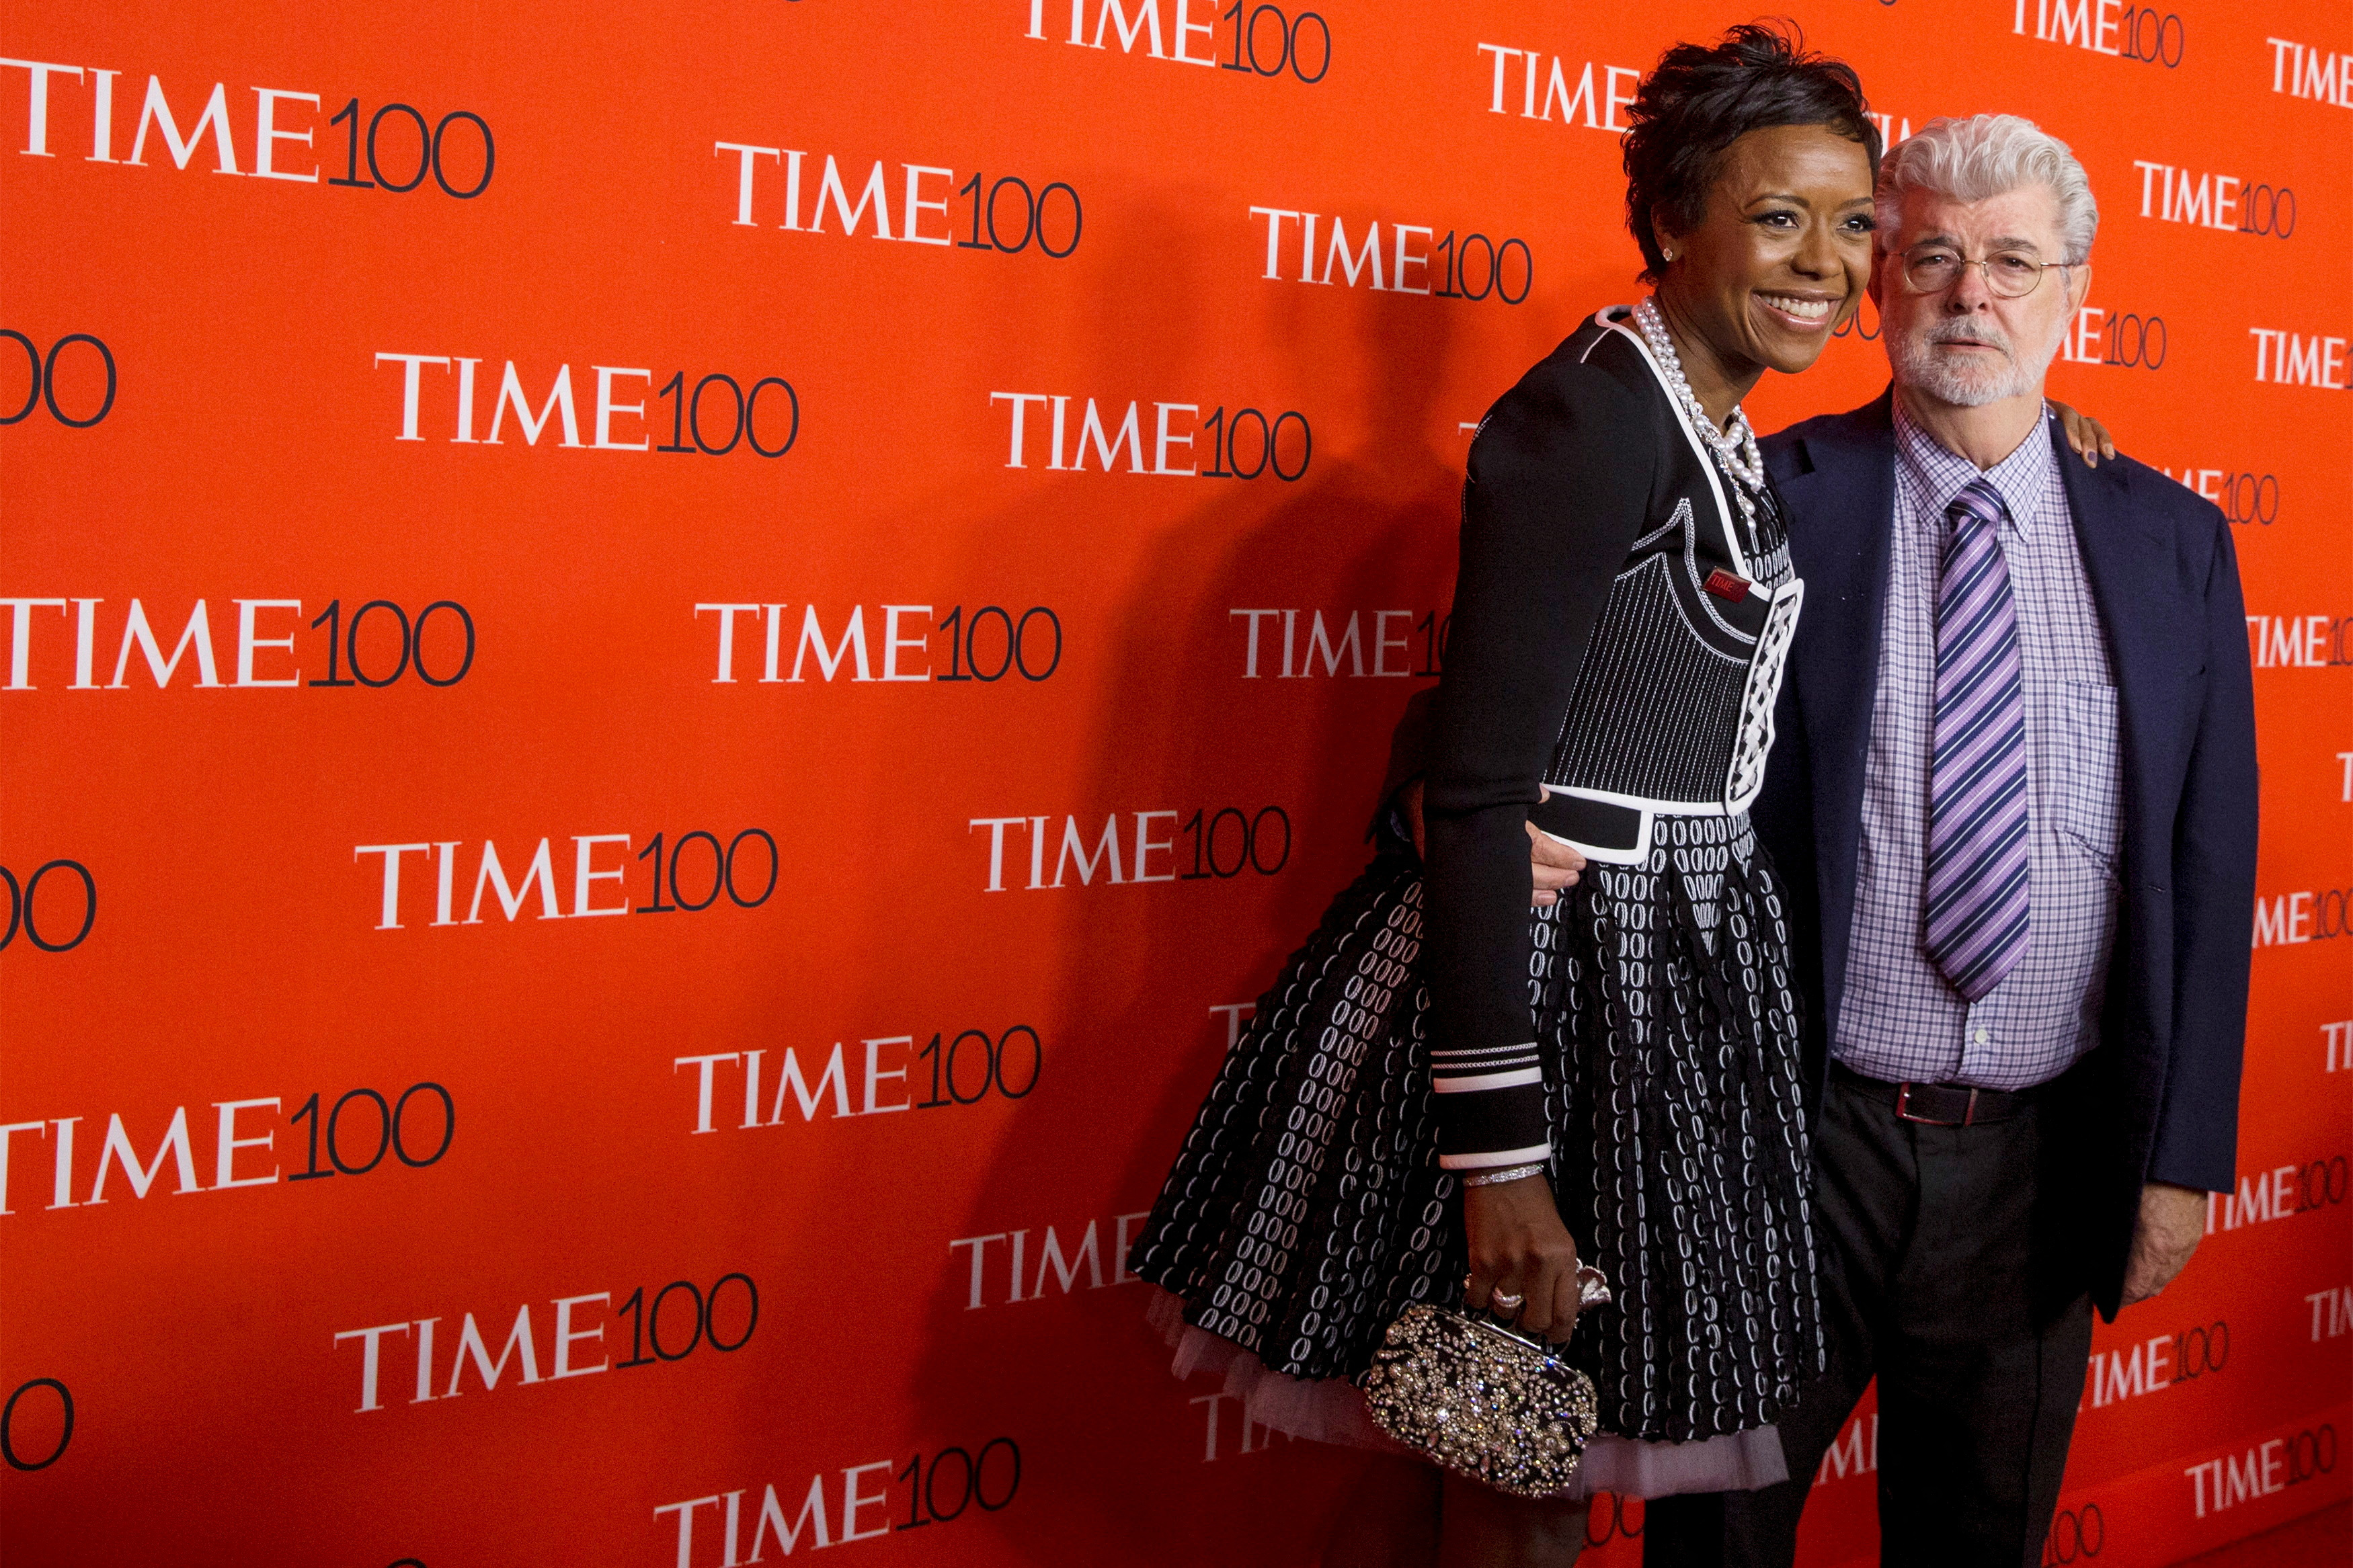 Director George Lucas and his wife Mellody Hobson arrive for the TIME 100 Gala in New York